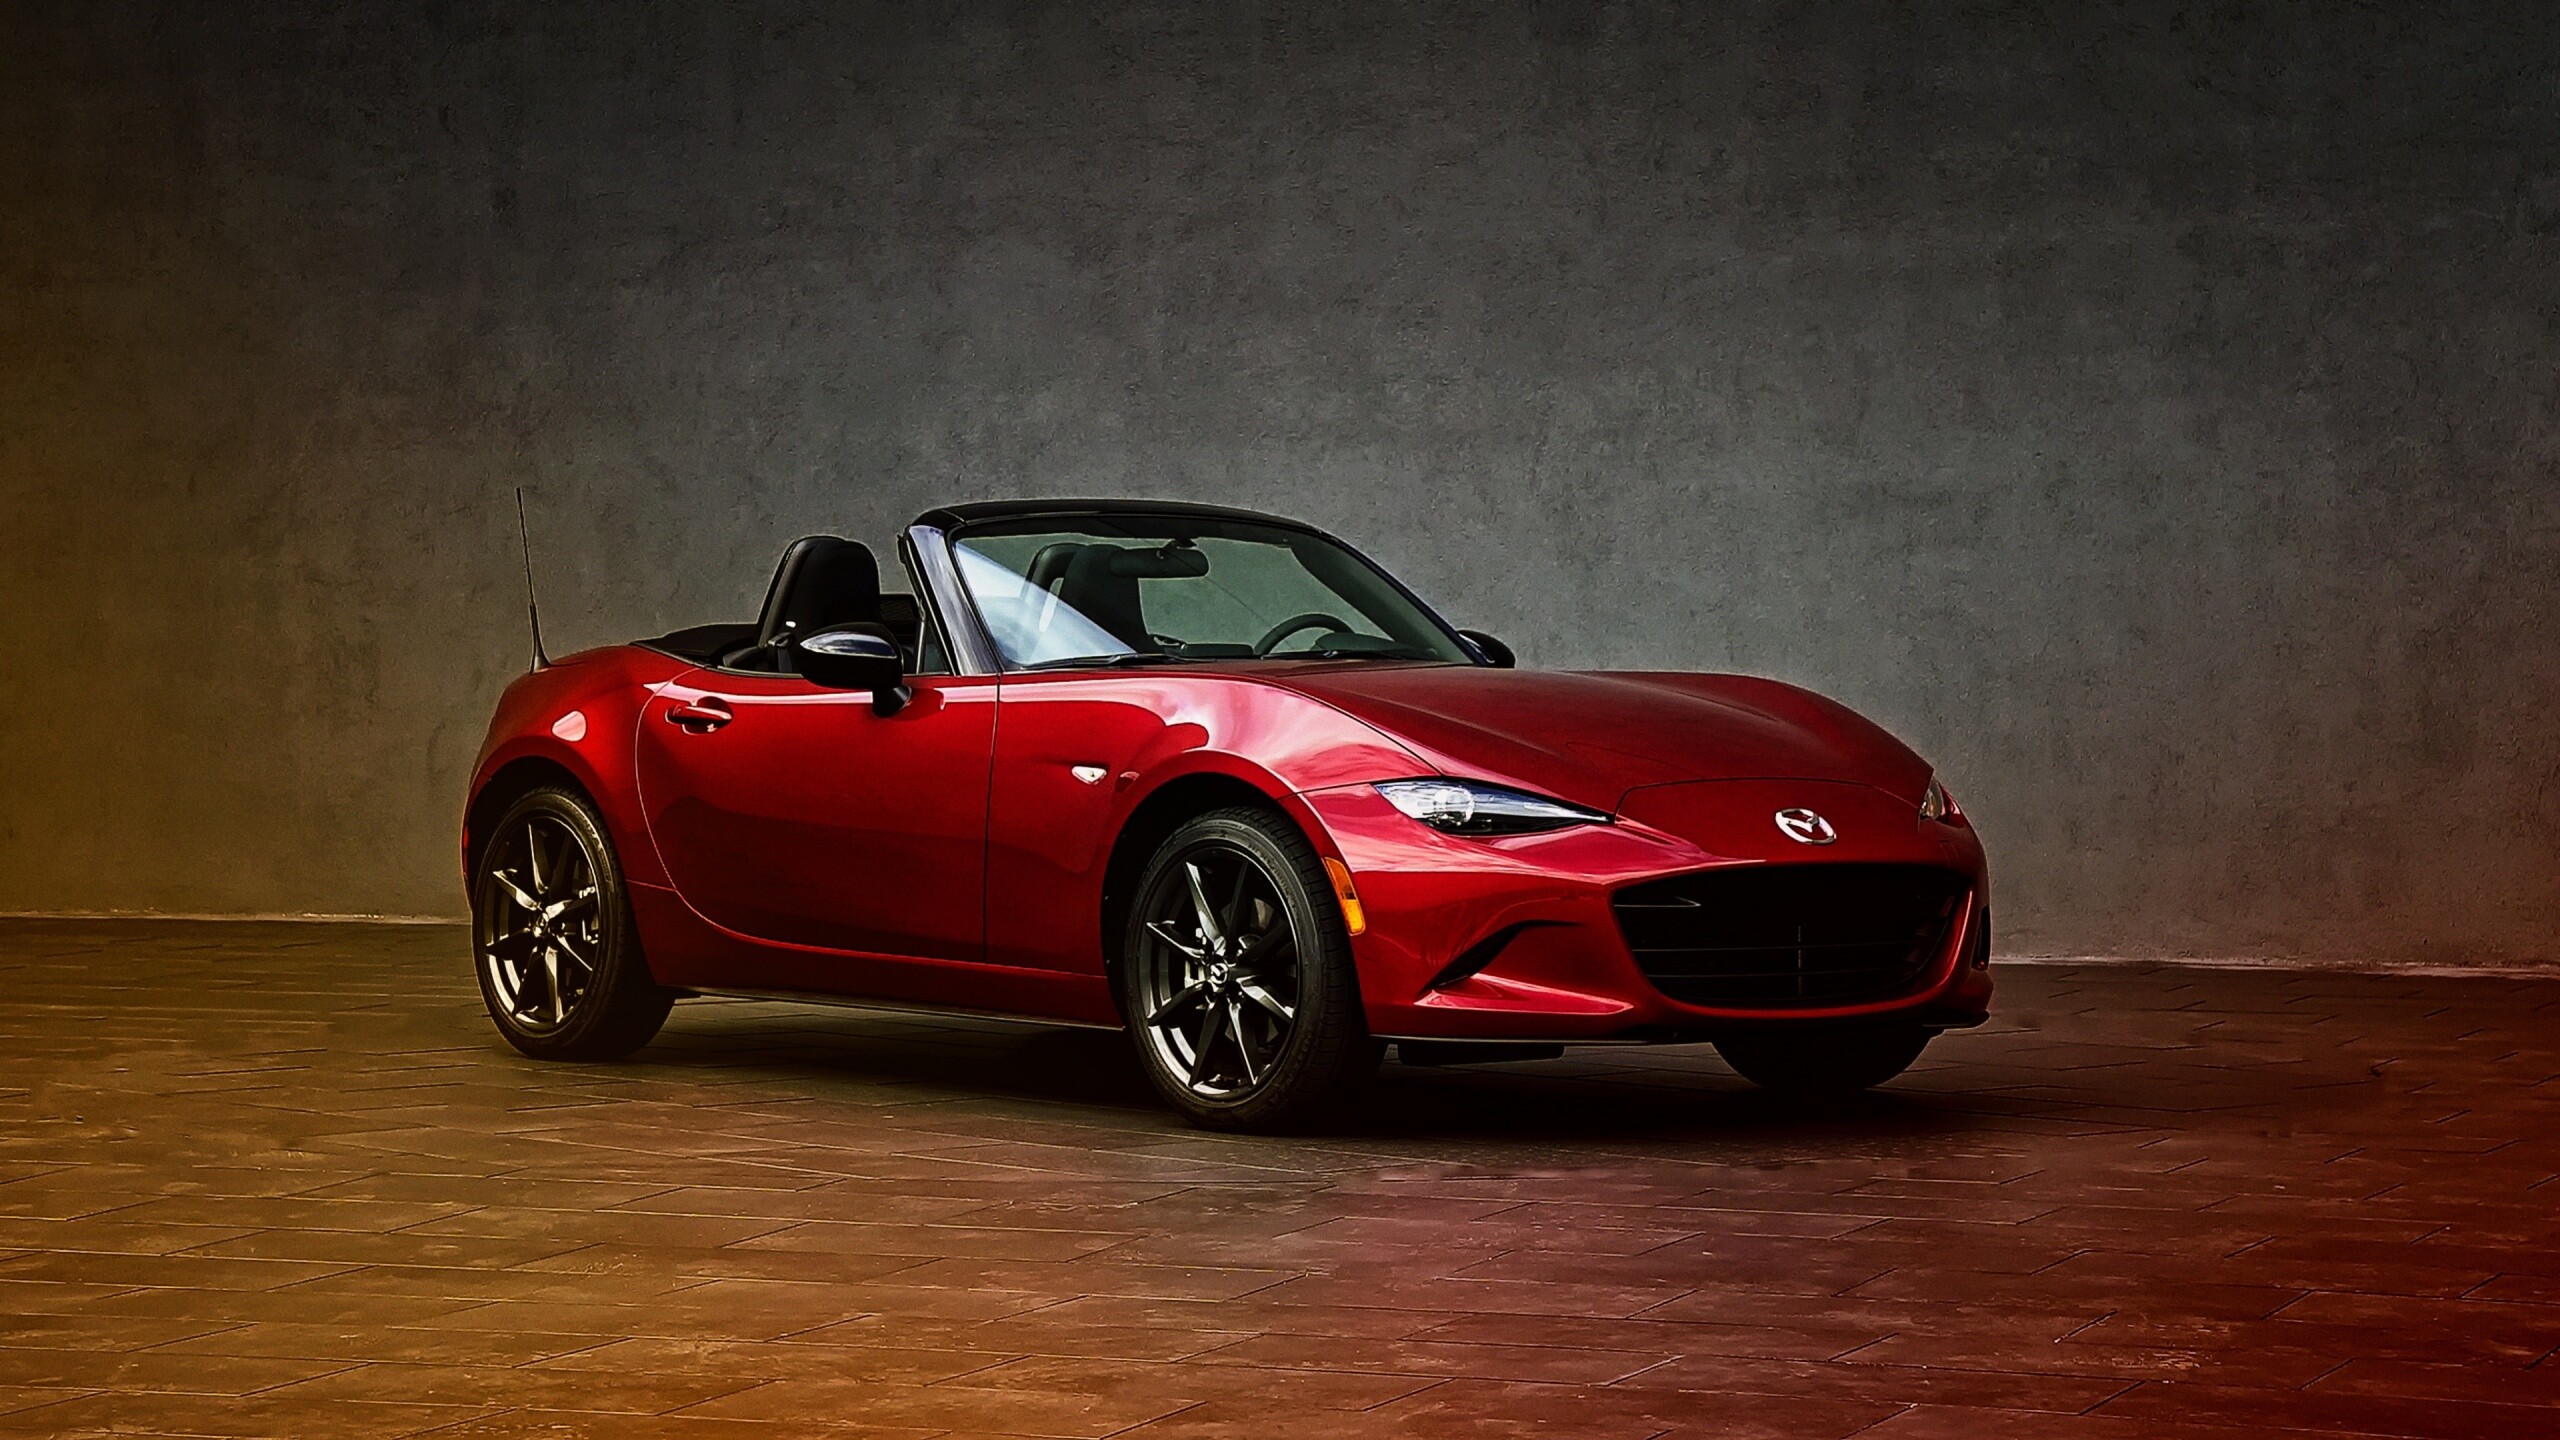 Mazda MX-5 Miata: The third-generation Mazda was introduced in 2005 and was in production until 2015. 2560x1440 HD Wallpaper.